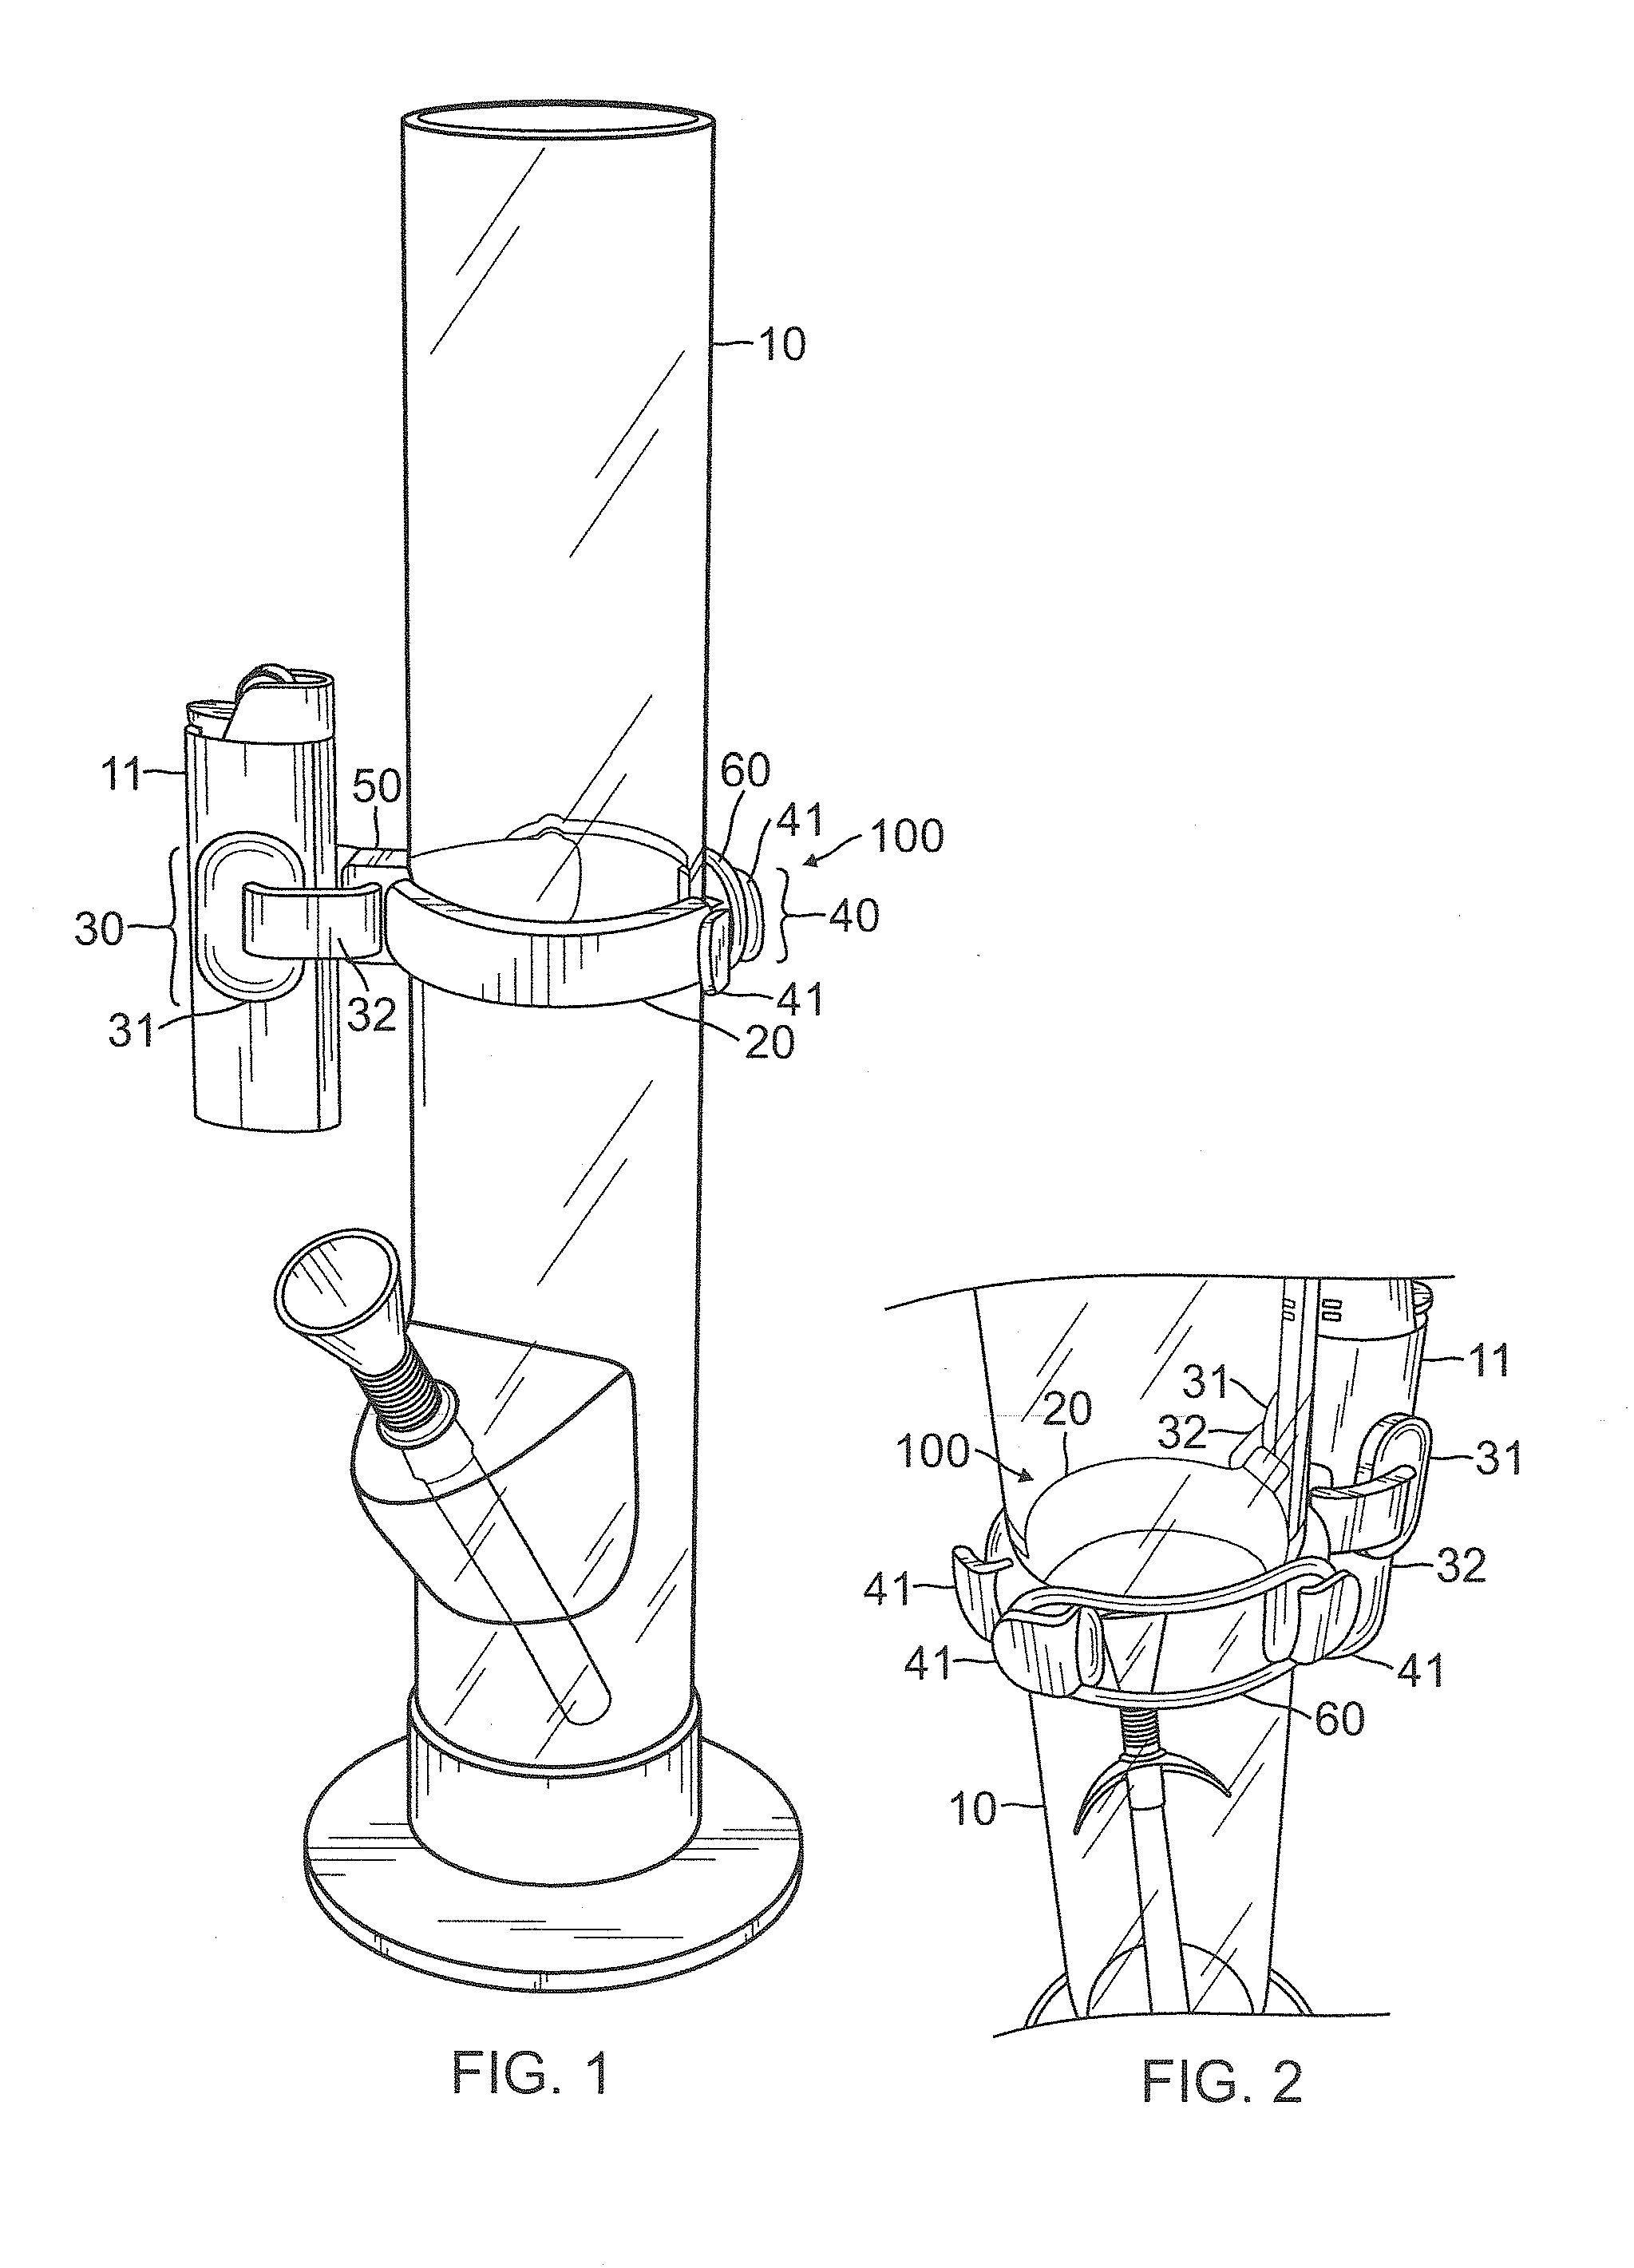 Lighter-holder for water pipe apparatus and methods